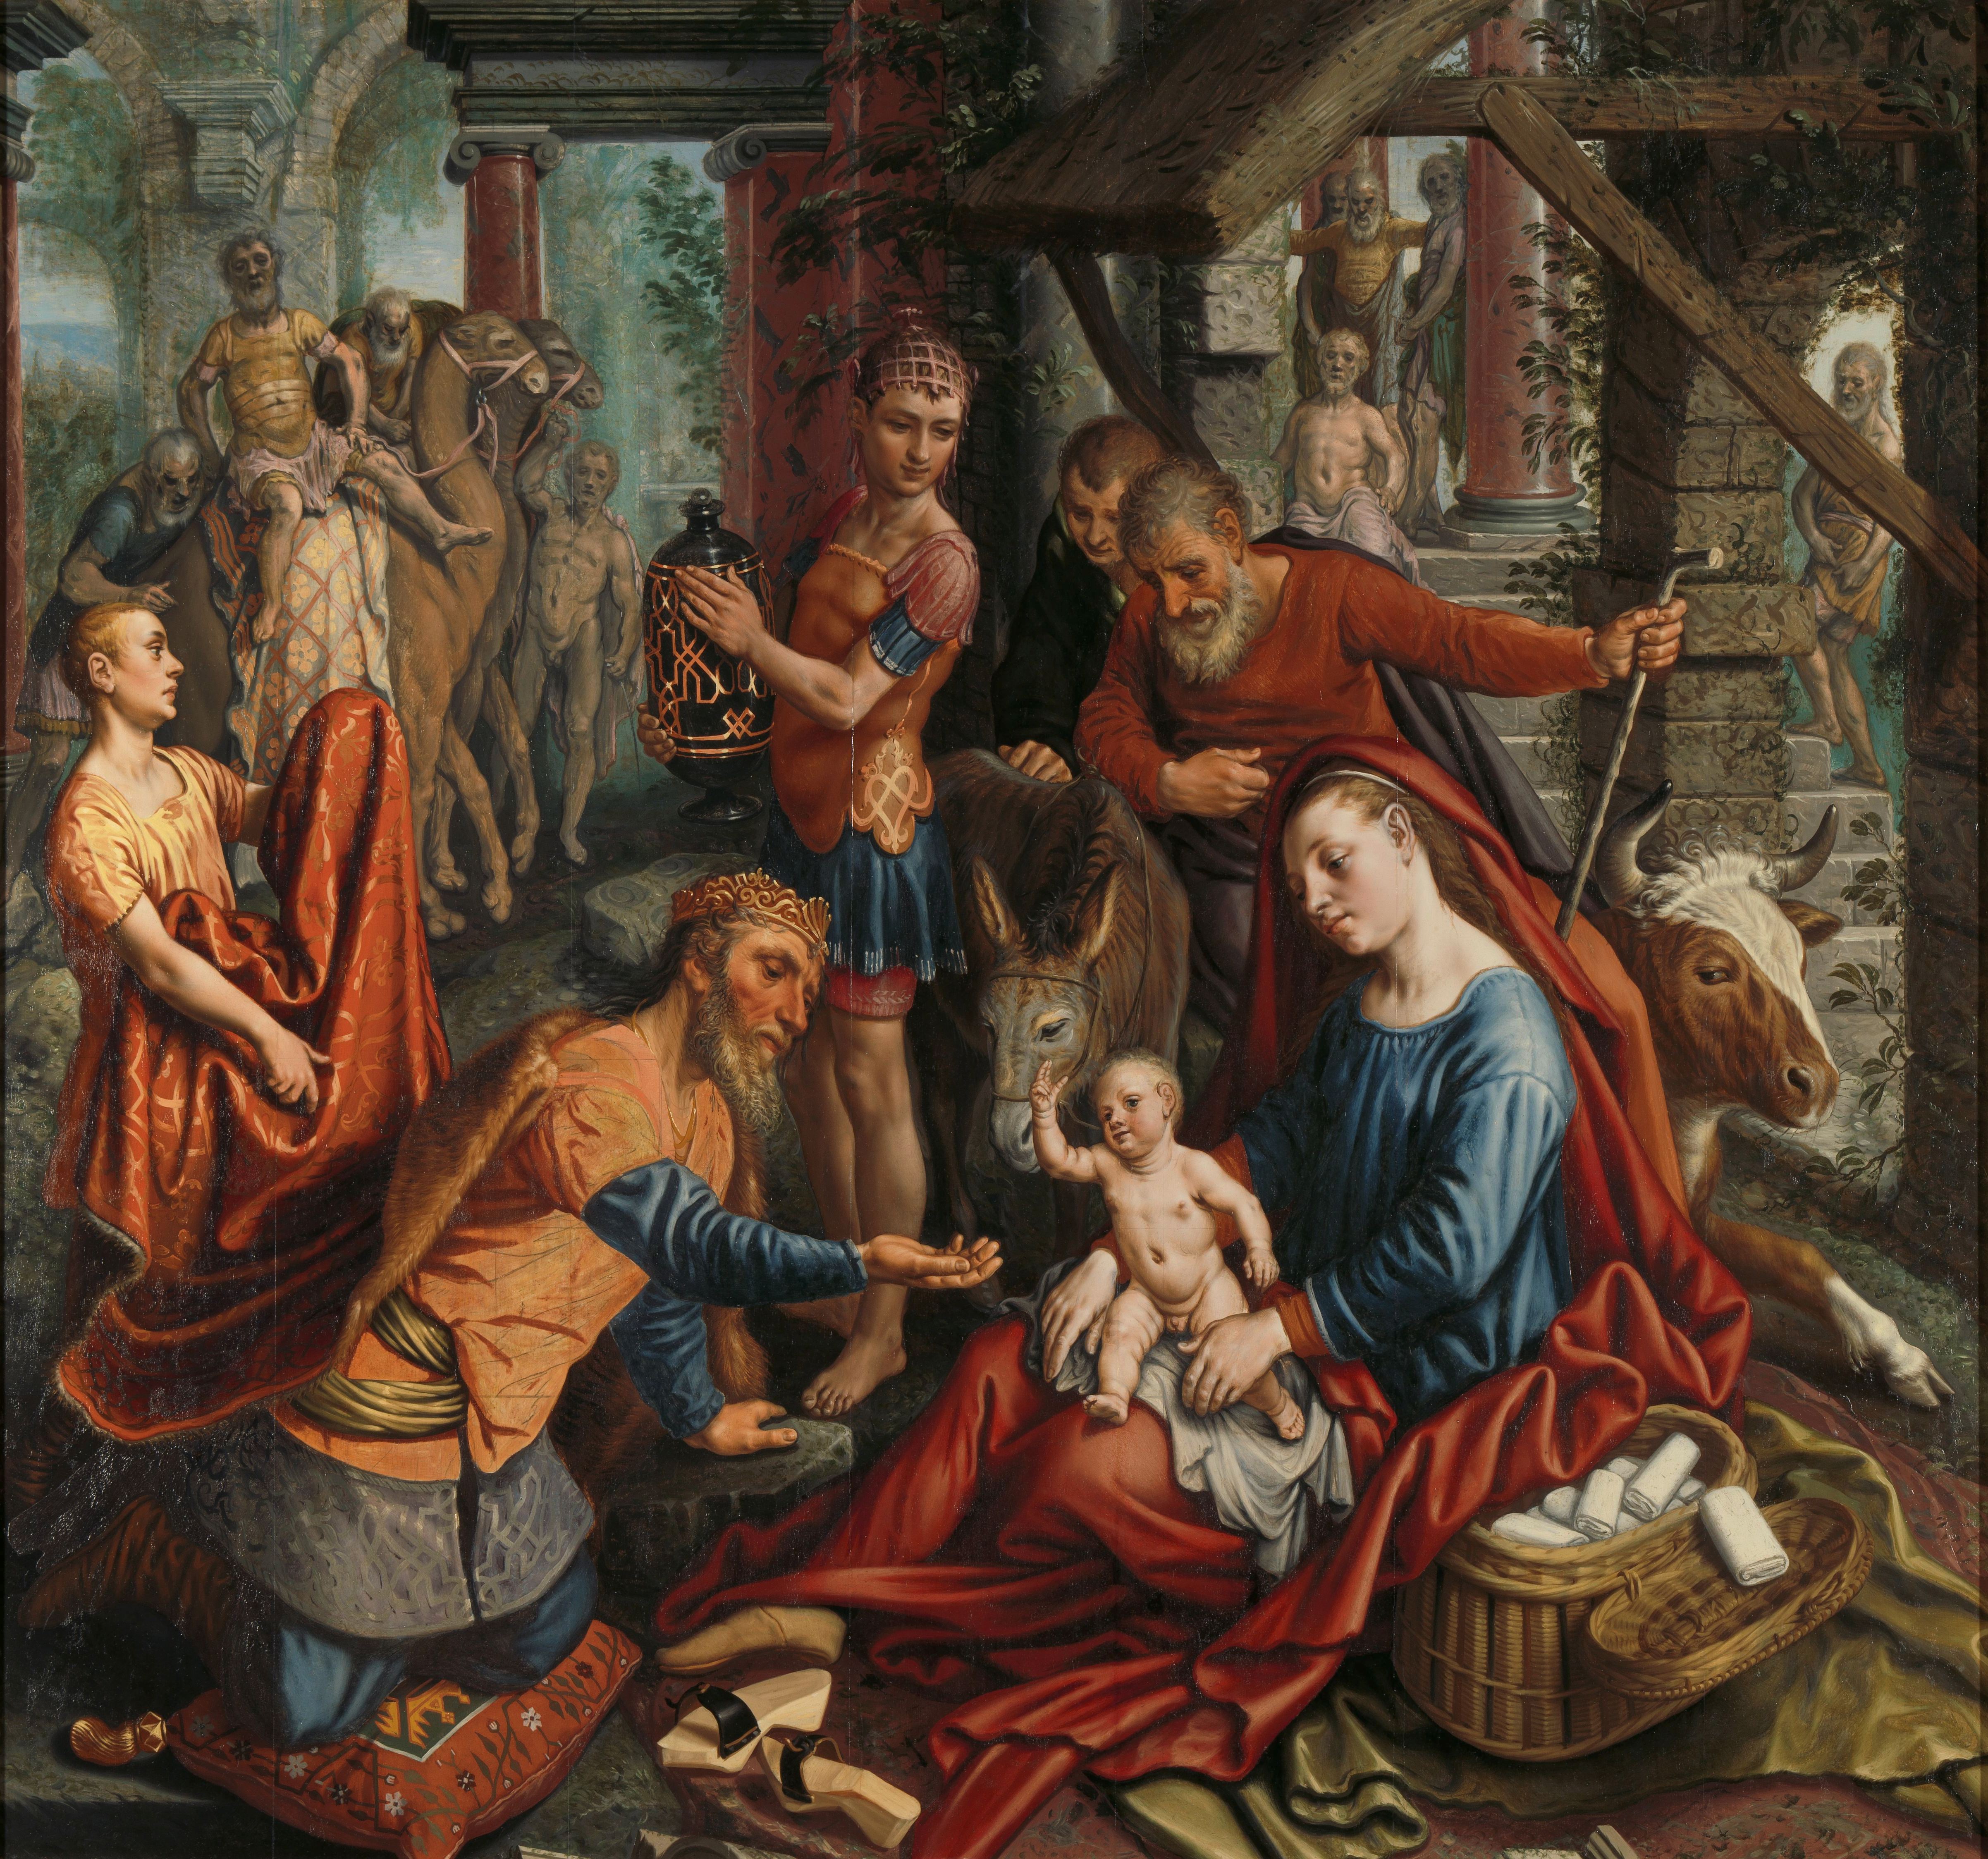 The Adoration of the Magi, Pieter Aertsen, c. 1560 oil on panel, h 167.5cm × w 180cm × w 62kg More details This altarpiece, which originally had two wings, is dedicated to the adoration of the newborn baby Jesus by the three magi, each of whom was represented on one of the panels. This centre panel depicts only the oldest king.